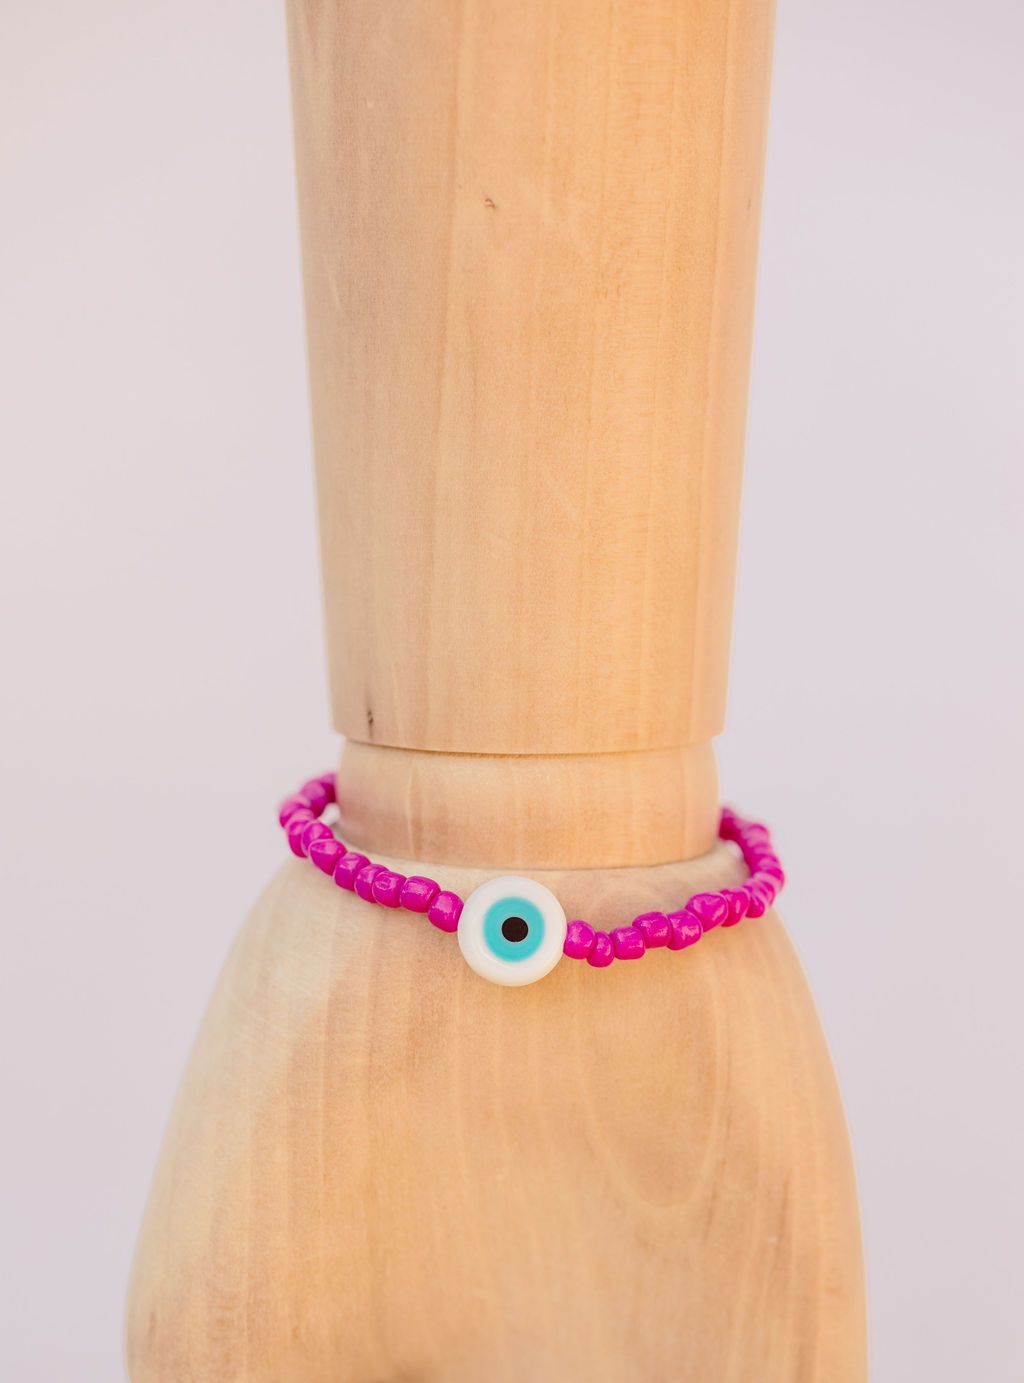 Neon pink Japanese glass beads on sturdy elastic. For that little pop of color and protection for your personal space bubble. Wear just one or stack 'em.